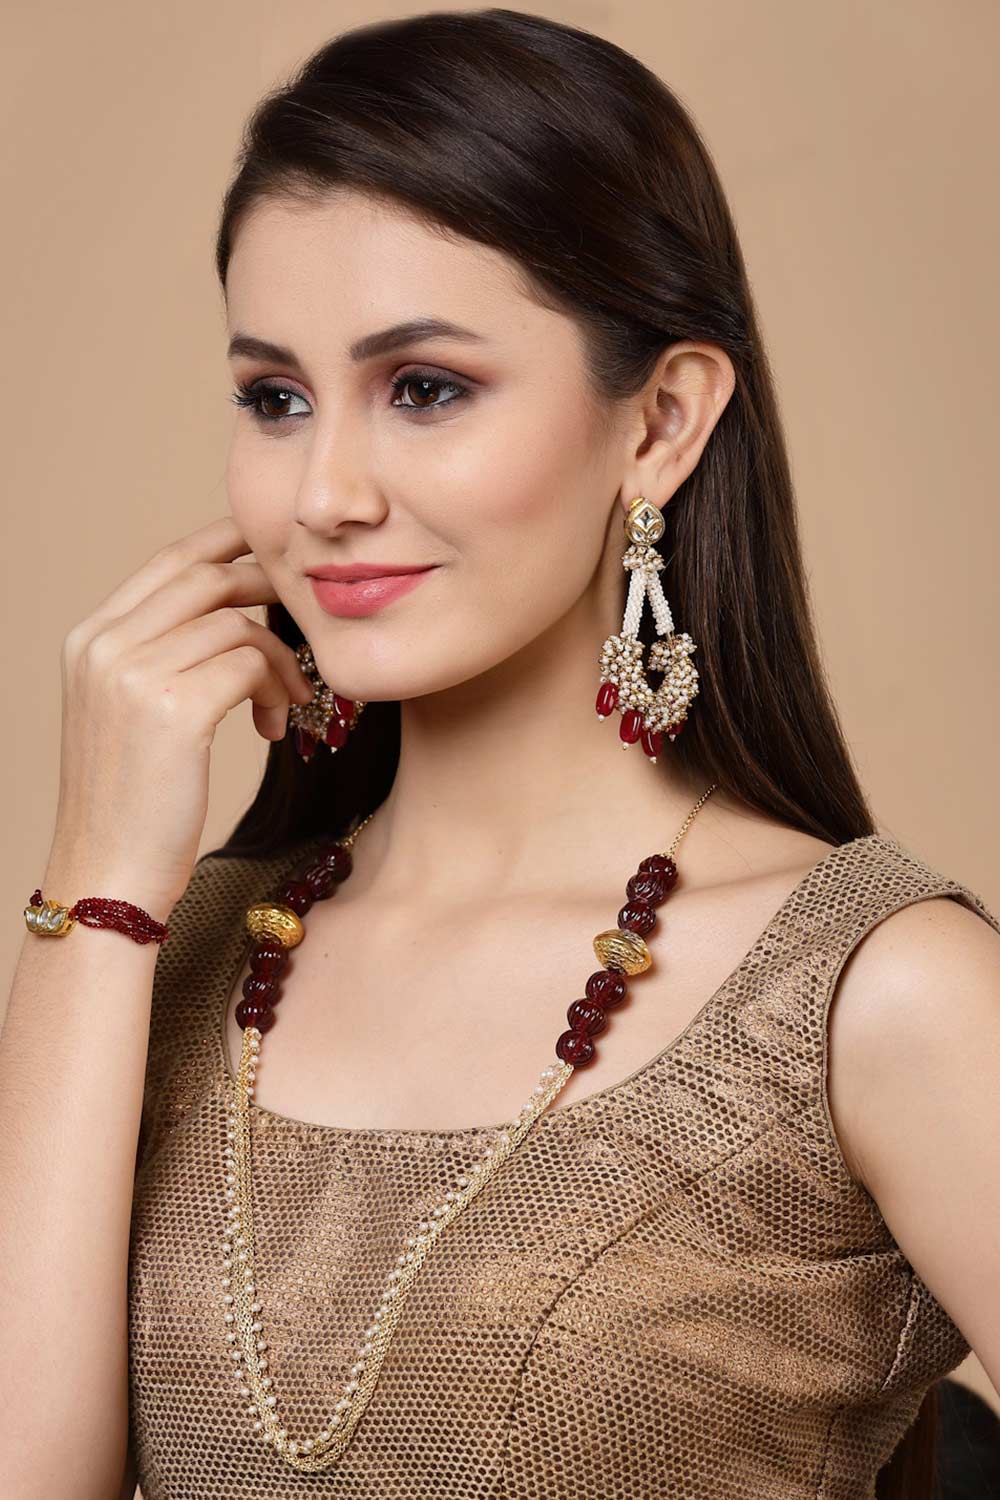 Red And Gold Gold-Plated Kundan And Pearls Bracelet